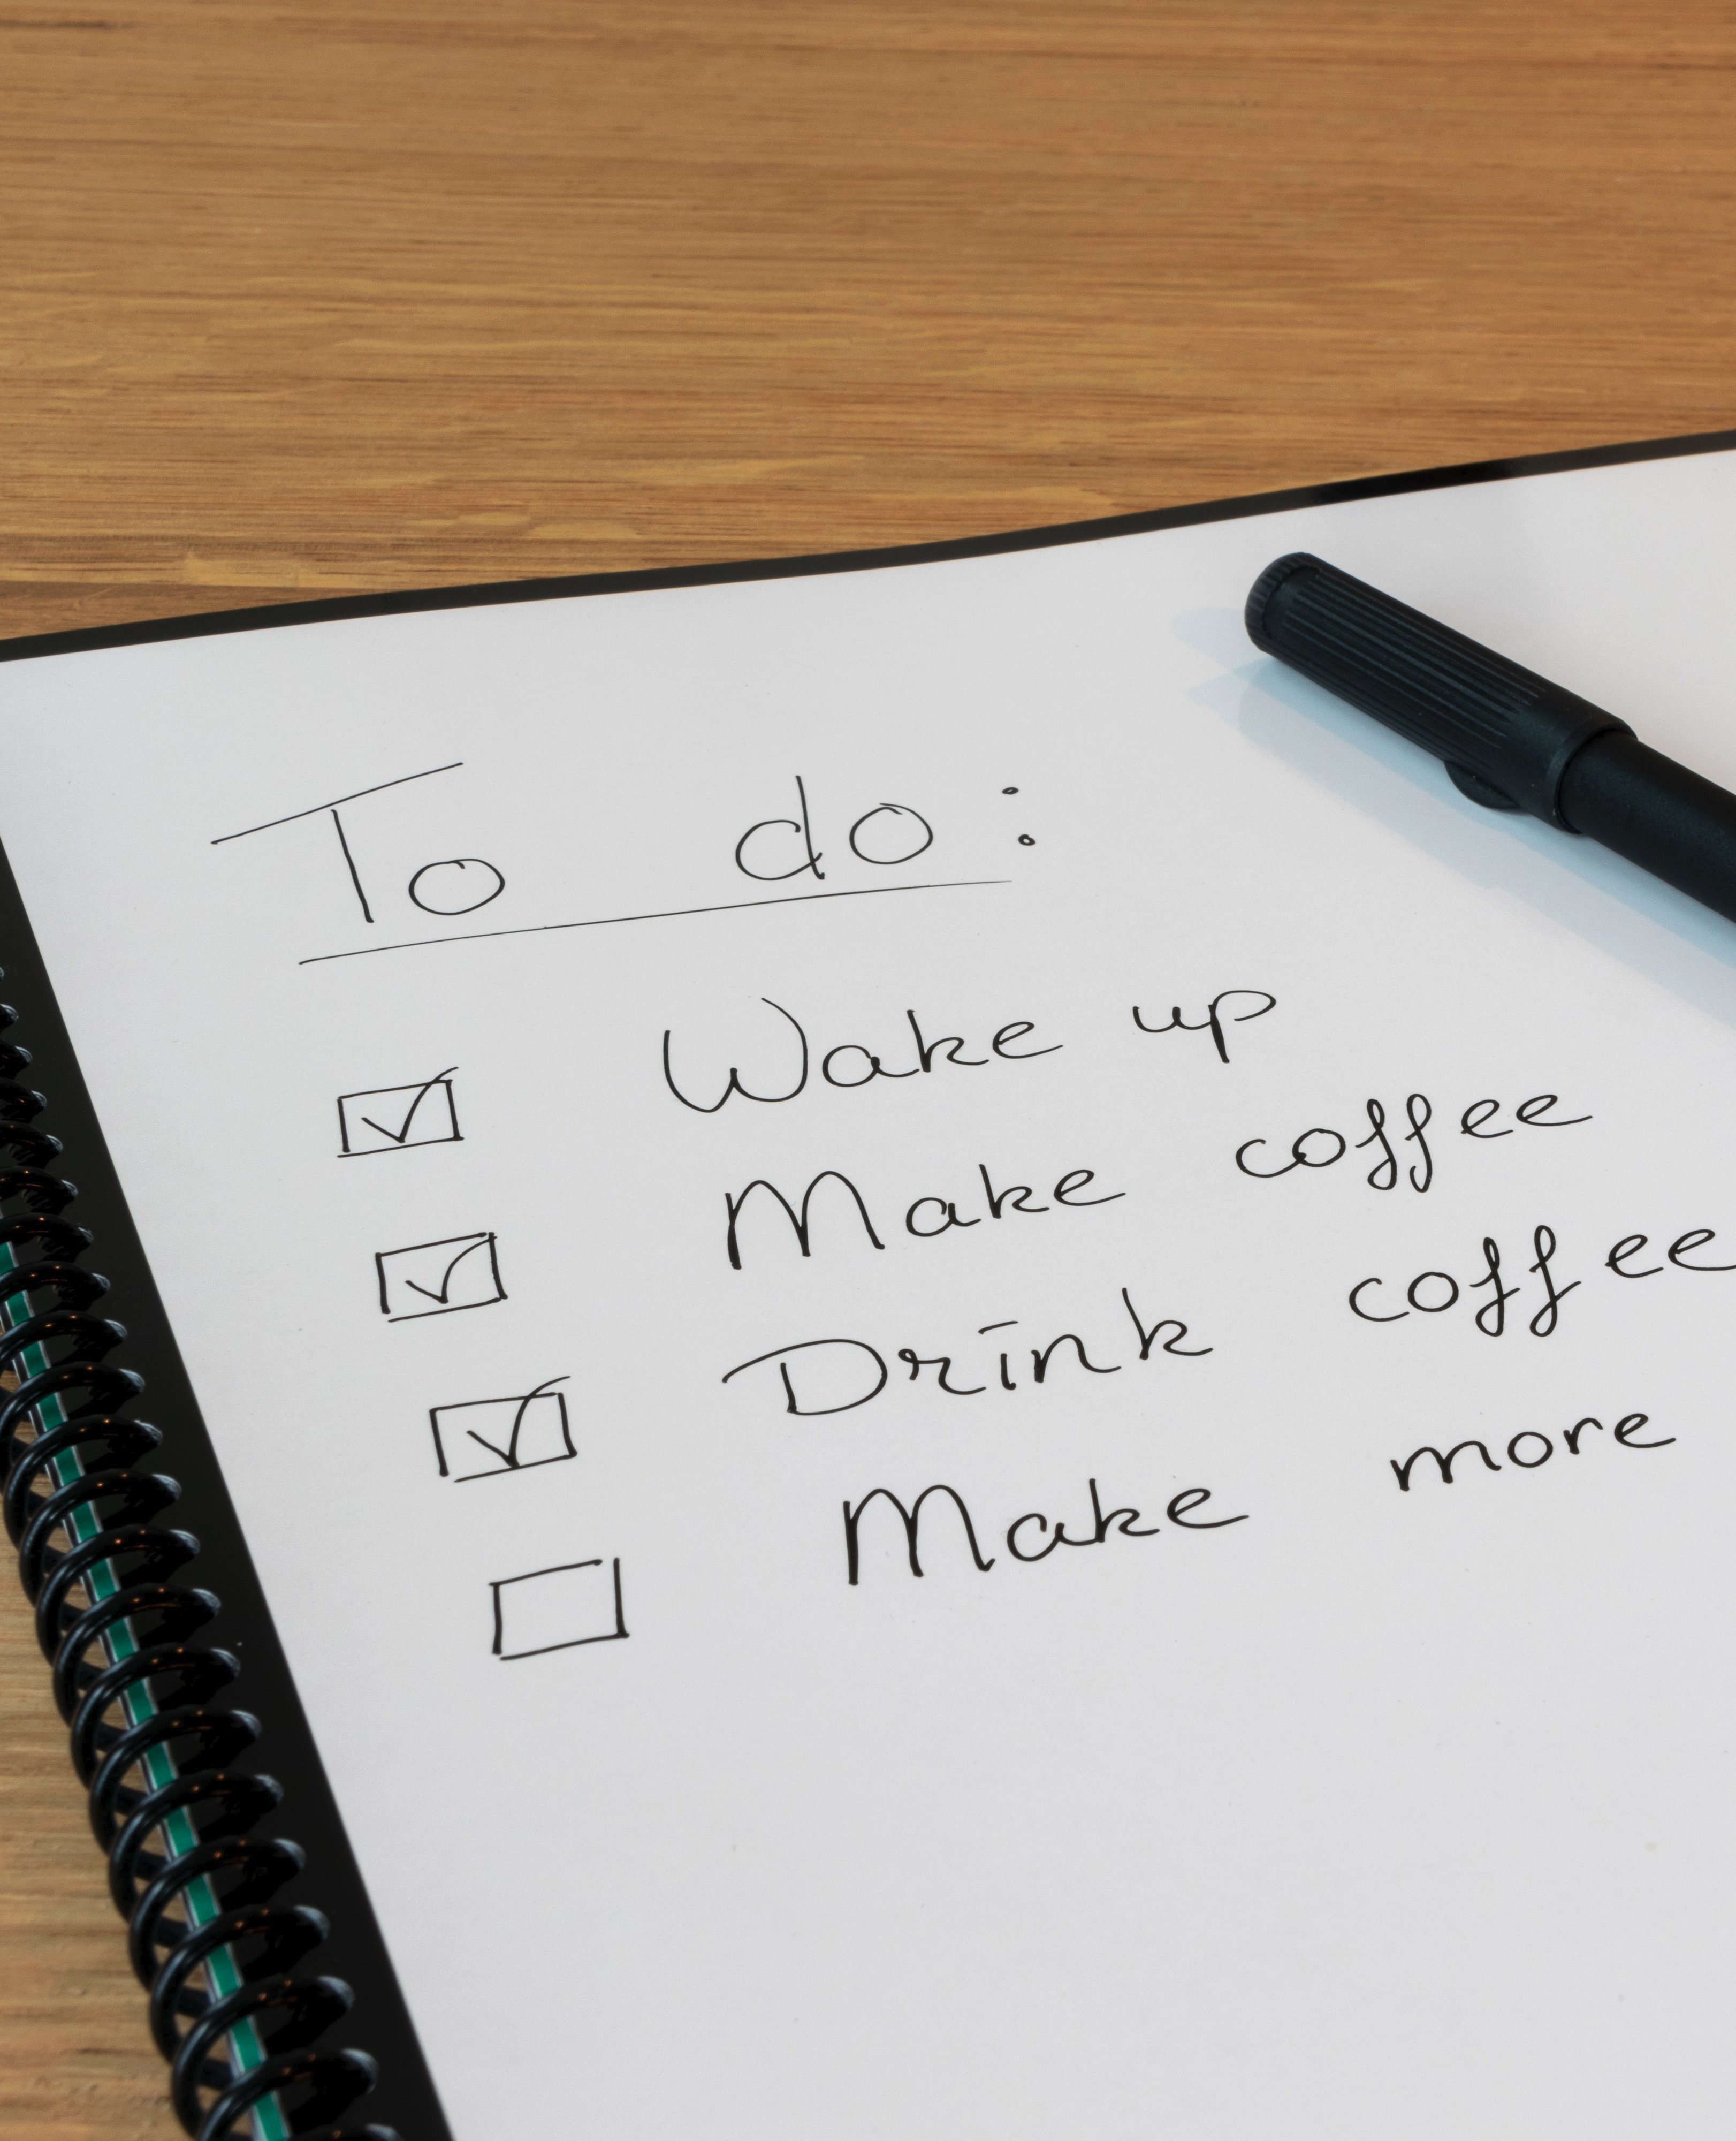 A close-up of a handwritten to-do list that has boxes for 'wake up' 'make coffee' 'drink cofee' and 'make more coffee'